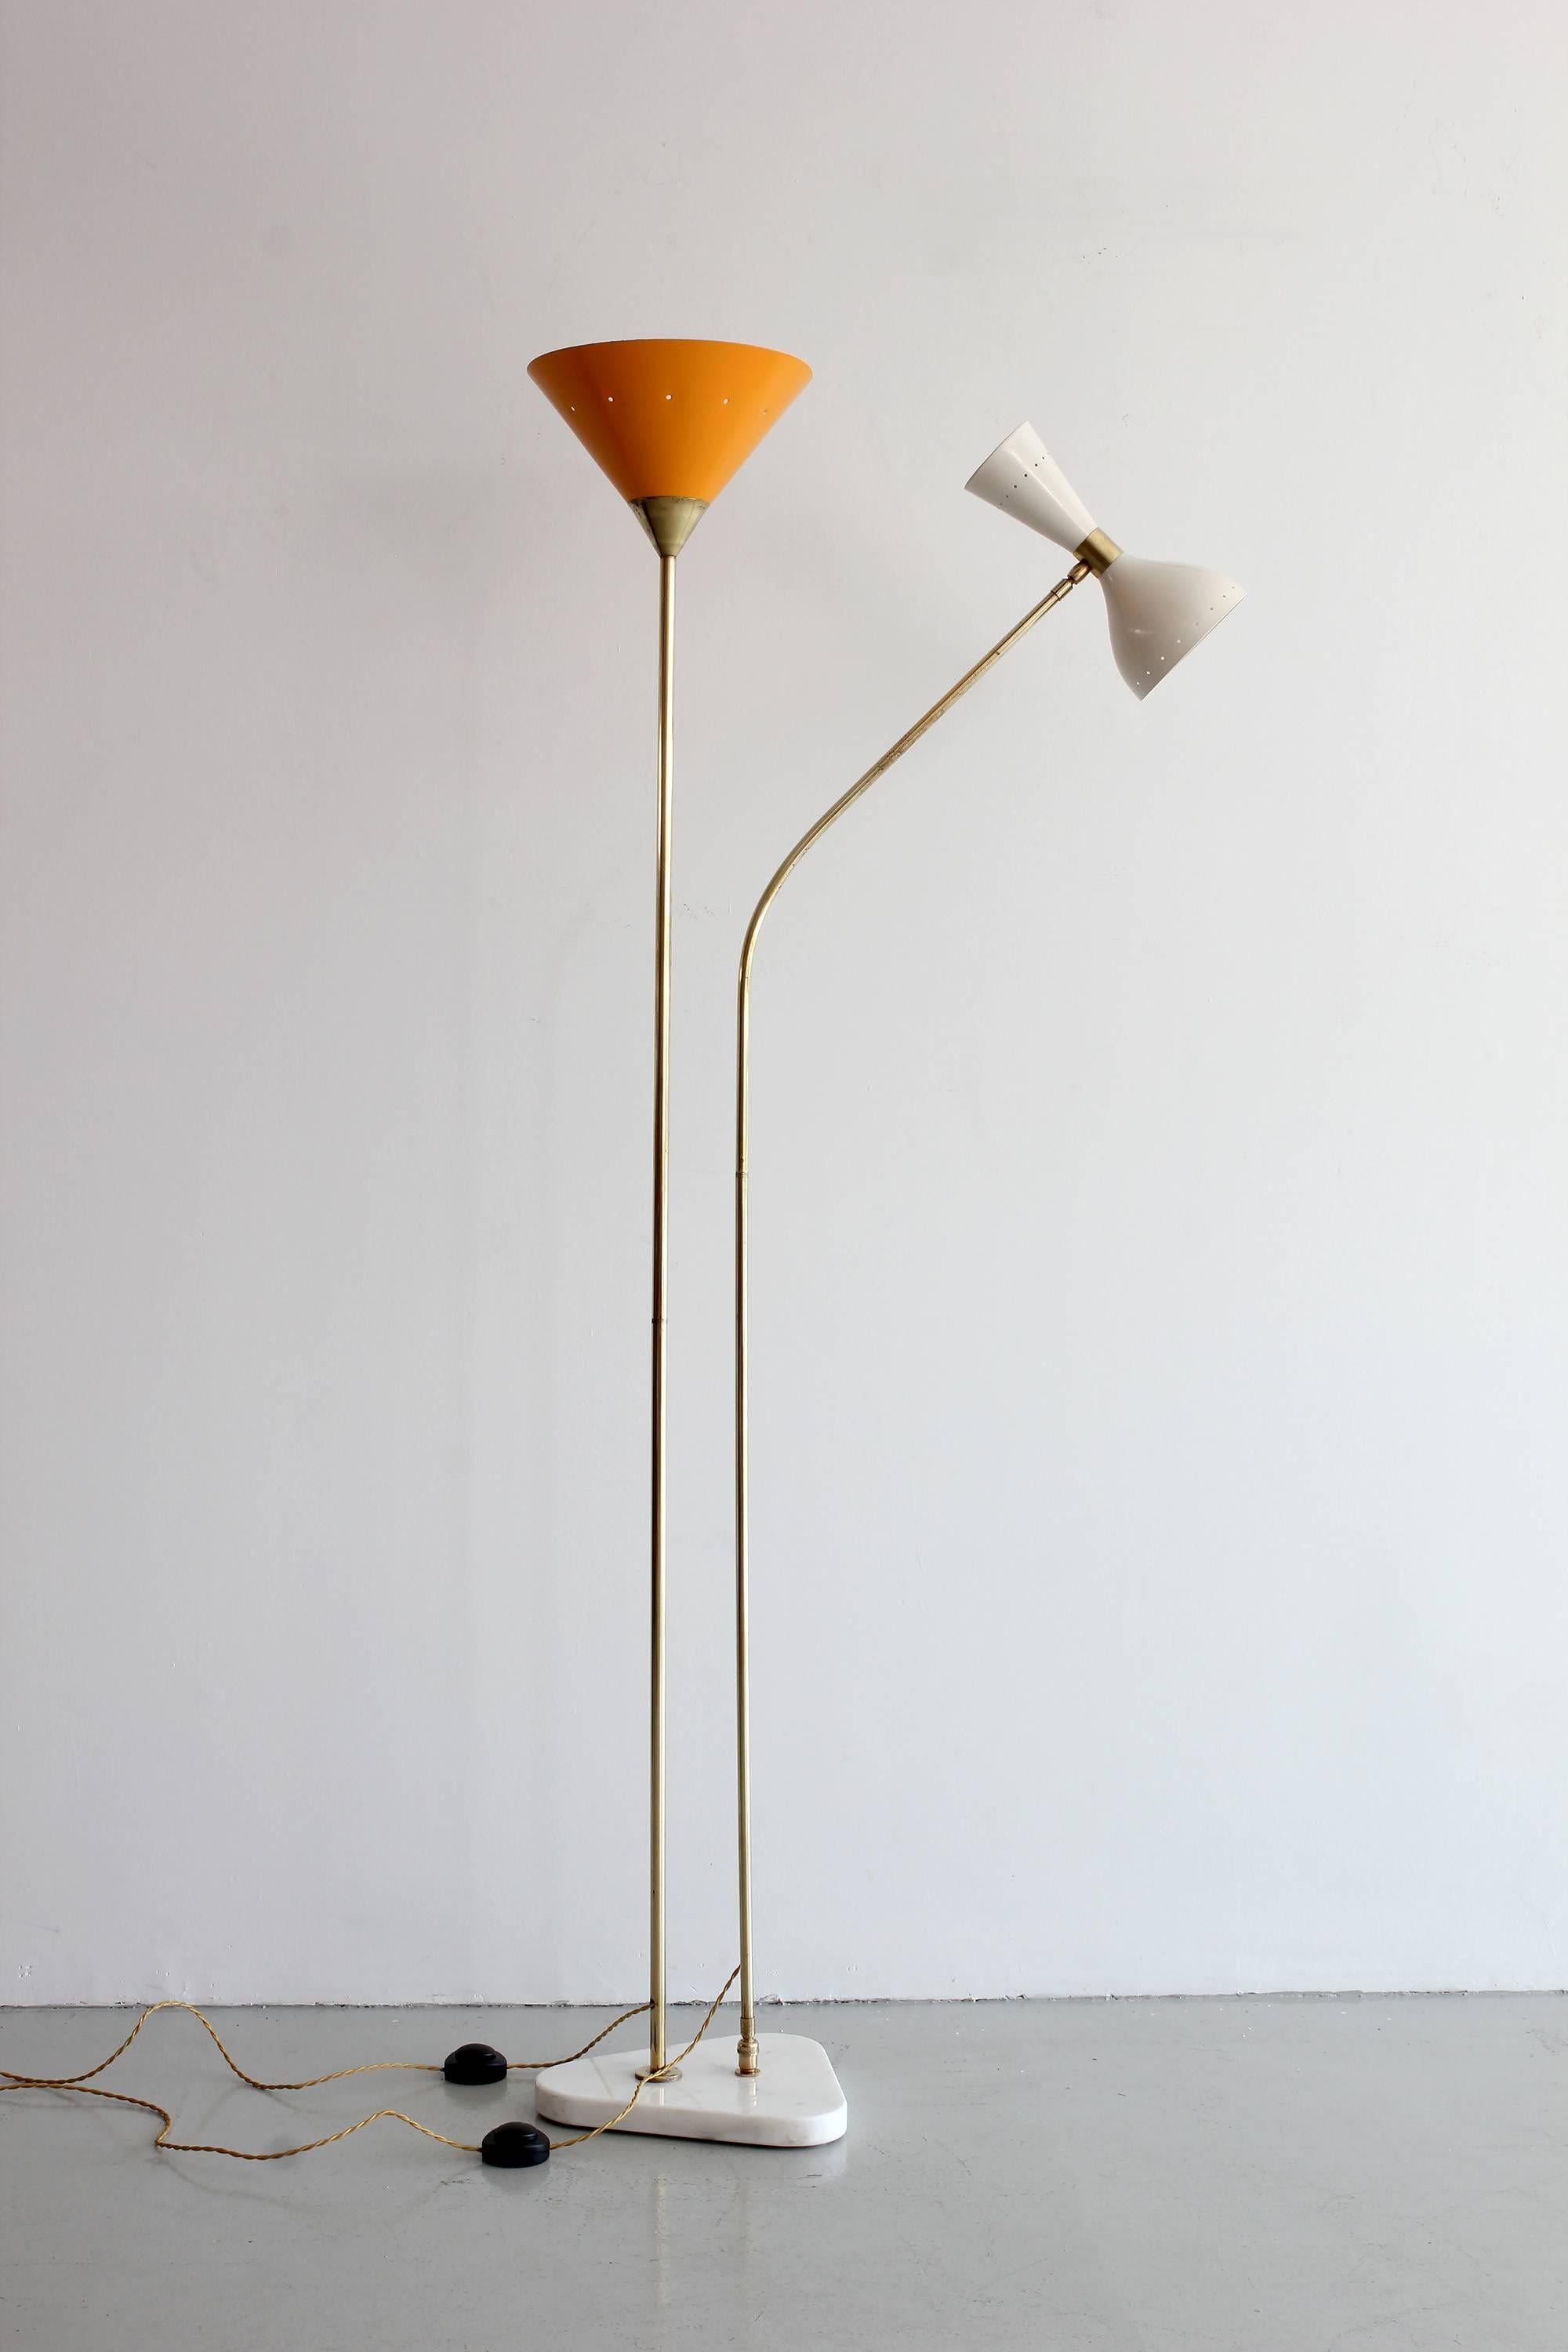 Floor lamp in the style of Stilnovo with two cone shades offering up and down light.
Newly produced in Italy and newly rewired by Orange.